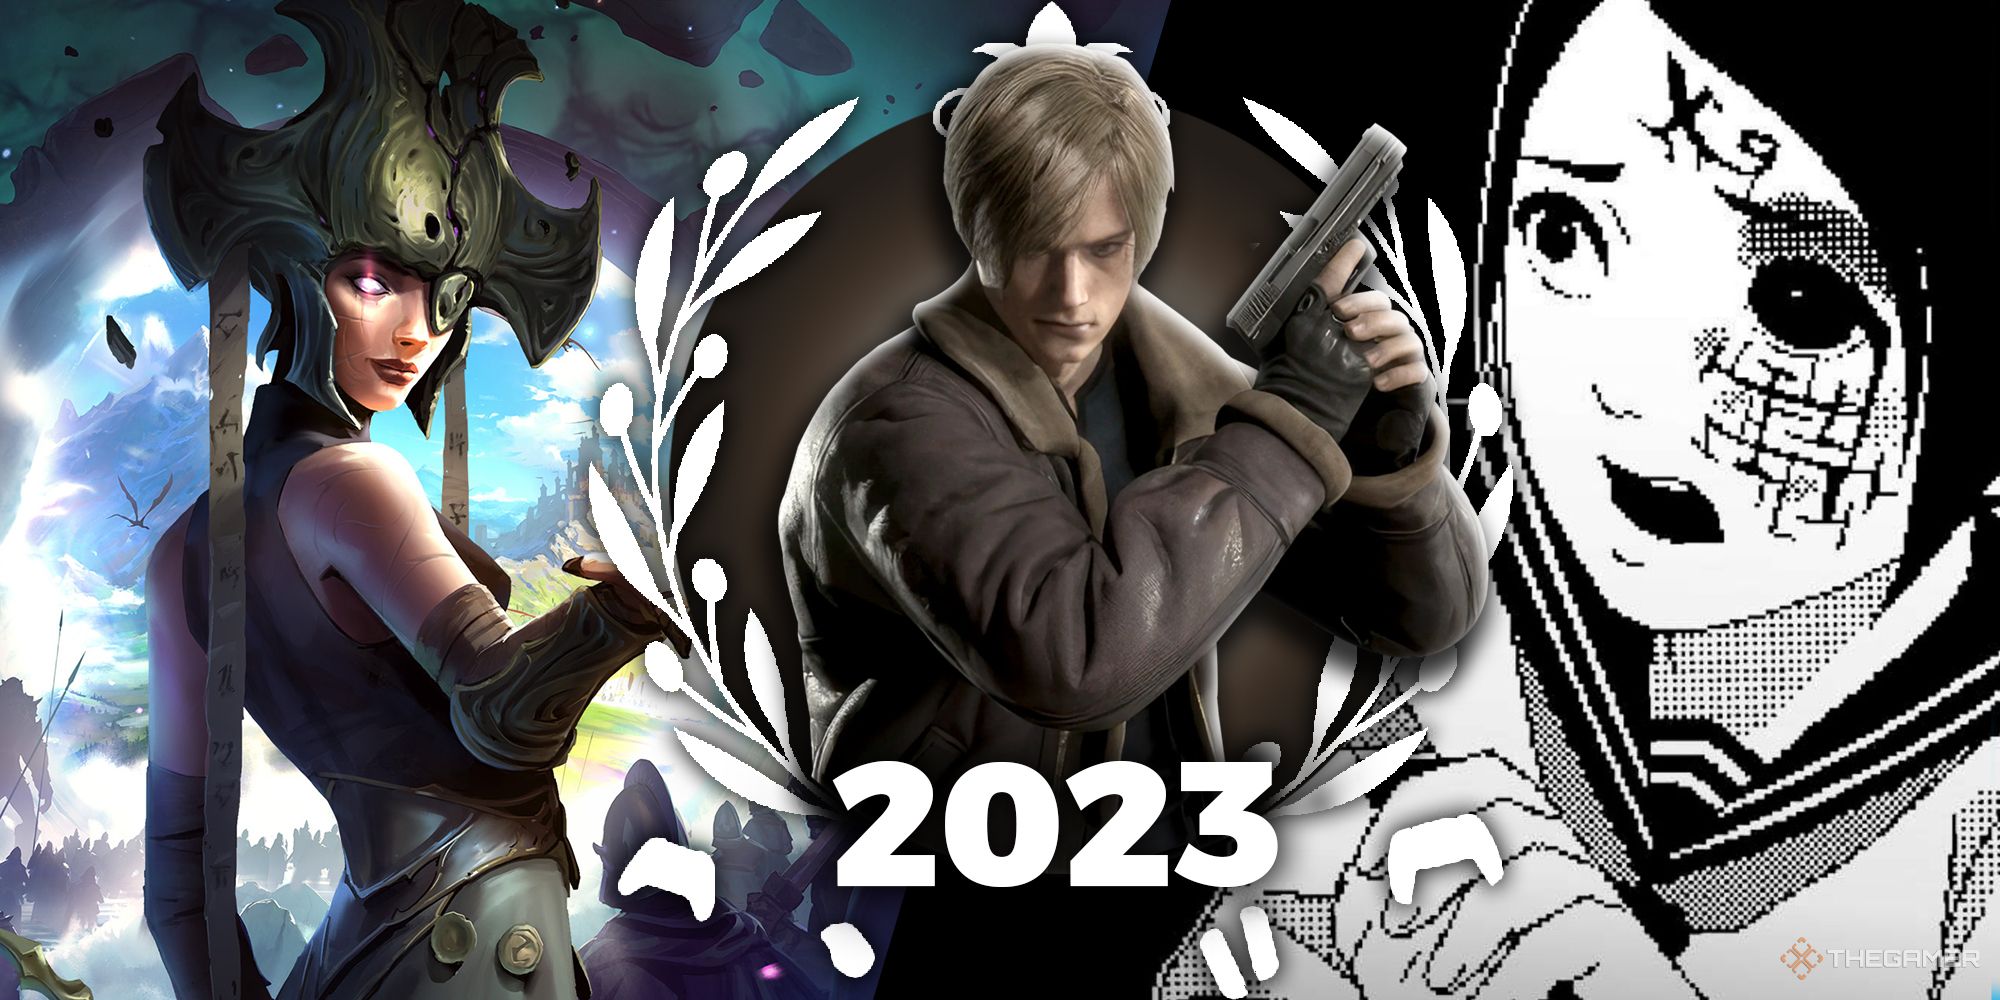 TheGamer's 2023 Editor's Pick laurels, featuring characters from Age of Wonders 4, Resident Evil 4 Remake, and World Of Horror